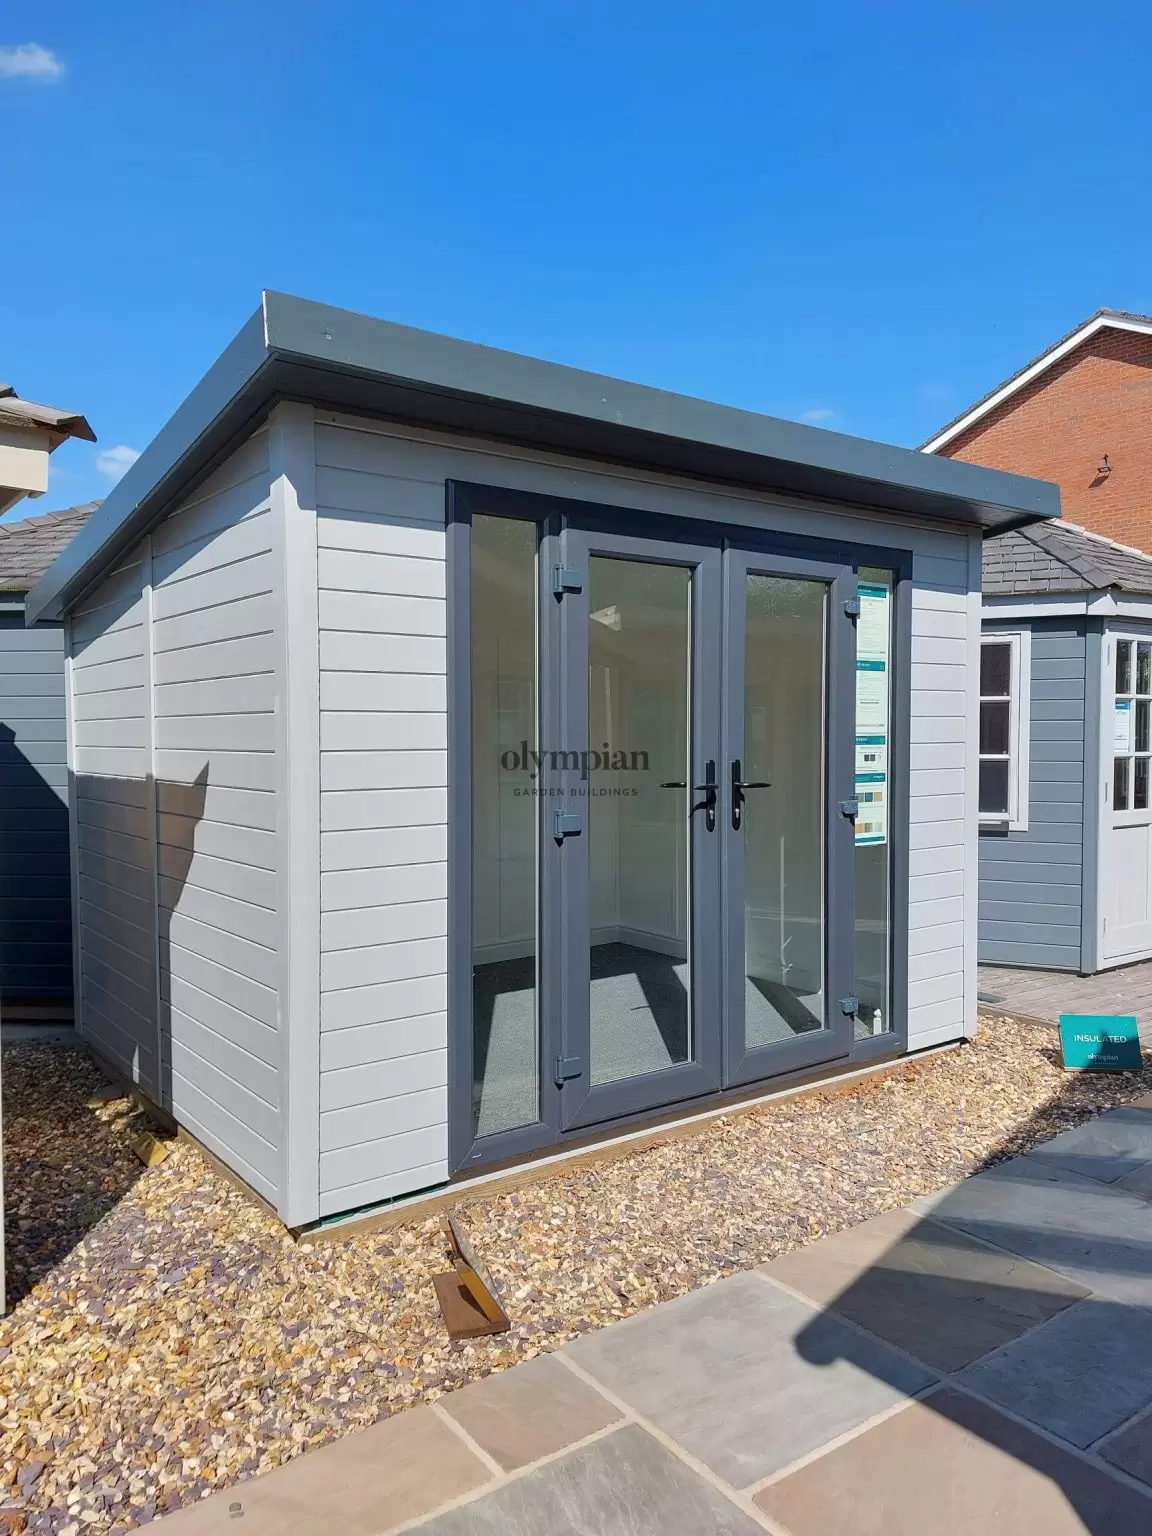 A 10ft x 8ft painted garden building with single-sloping roof and UPVC doors, surrounded with other garden buildings between landscaped Indian stone paving and stones